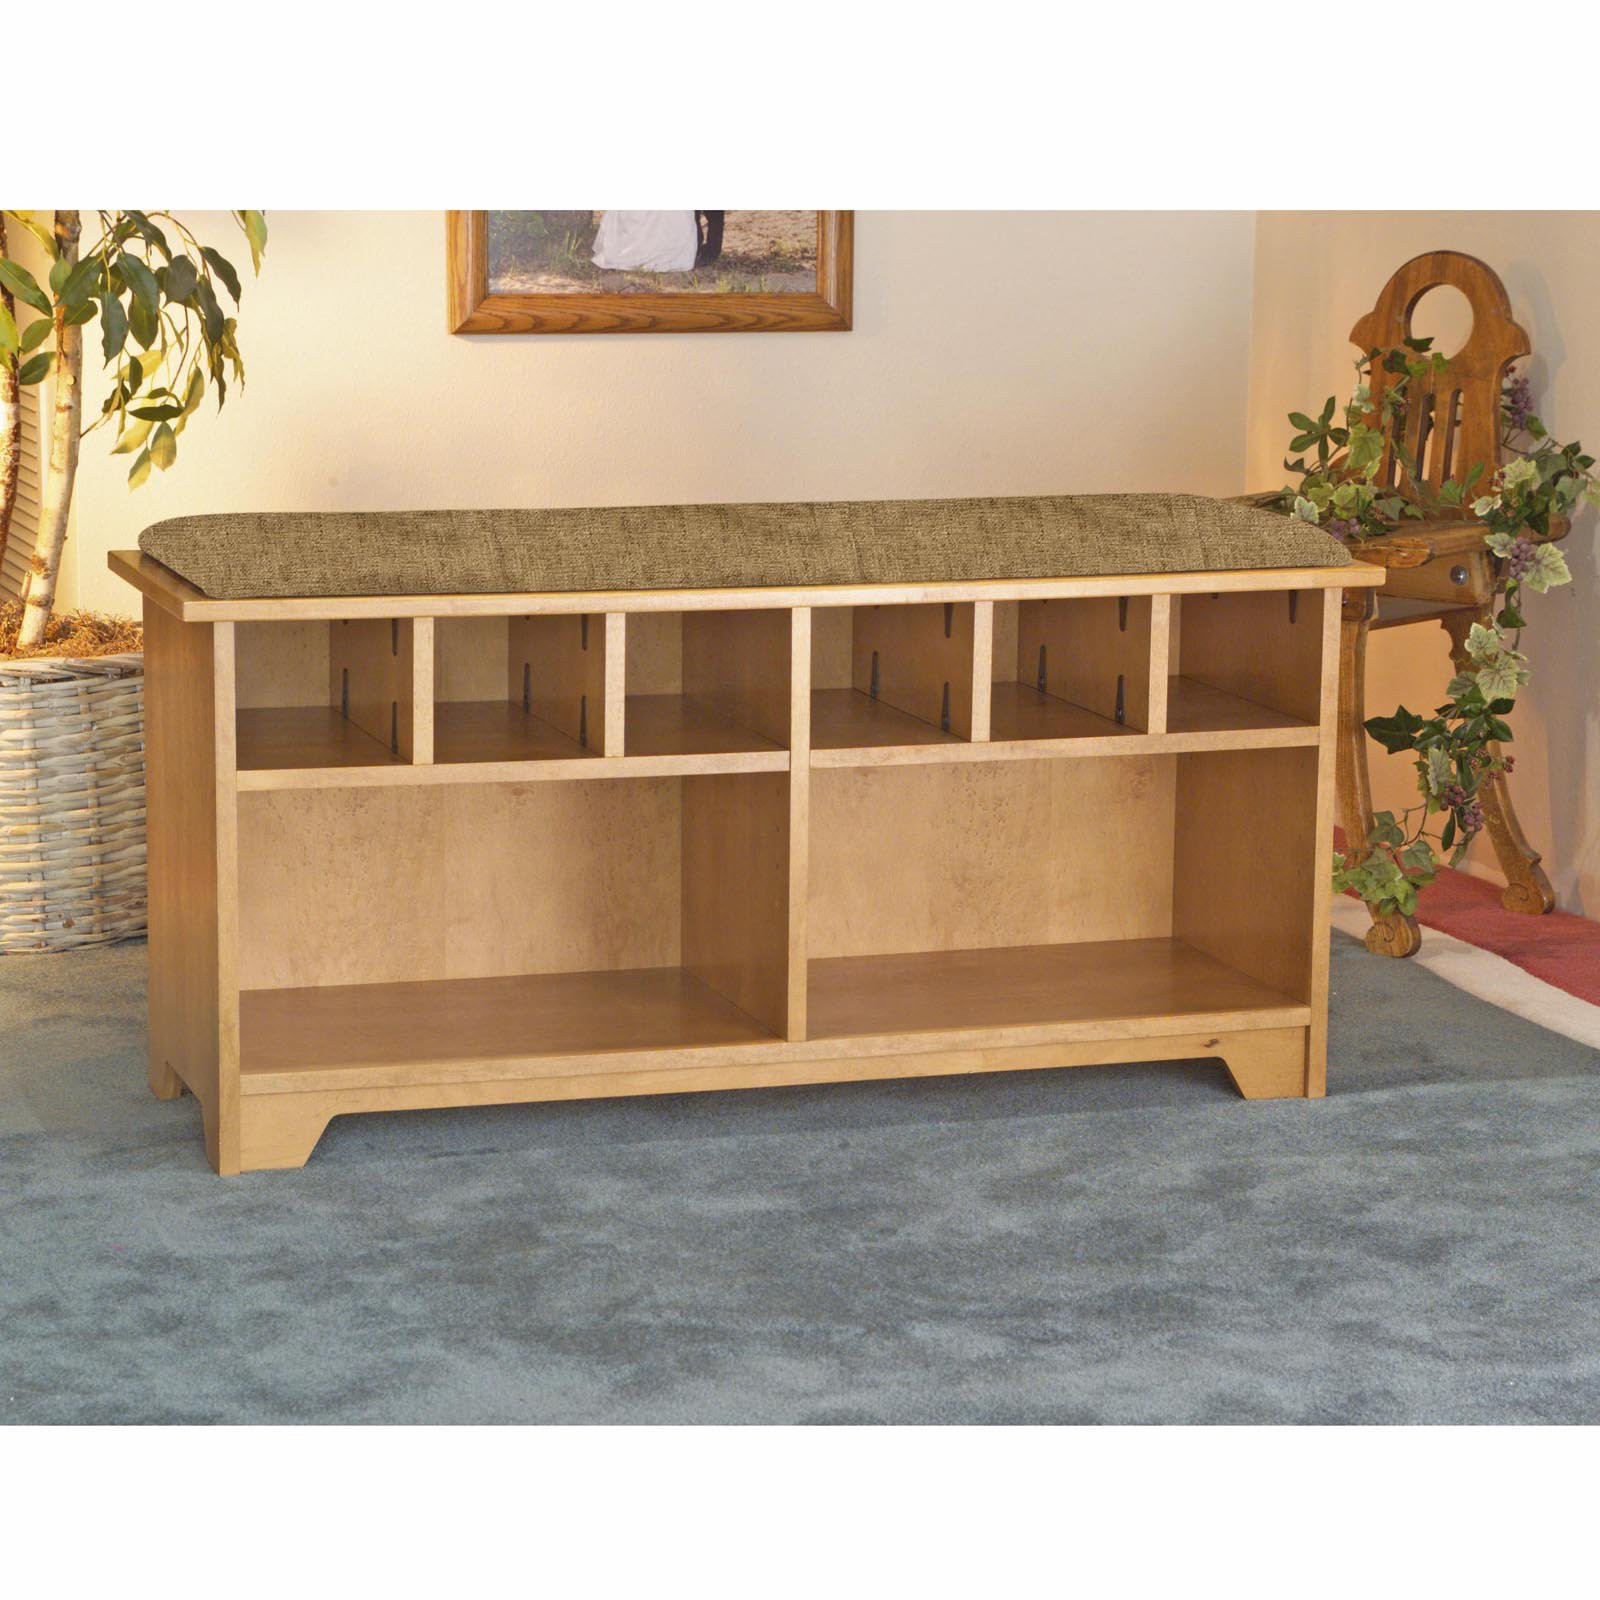 Cubby Storage Bench
 Quad Cubby Storage Bench at Hayneedle